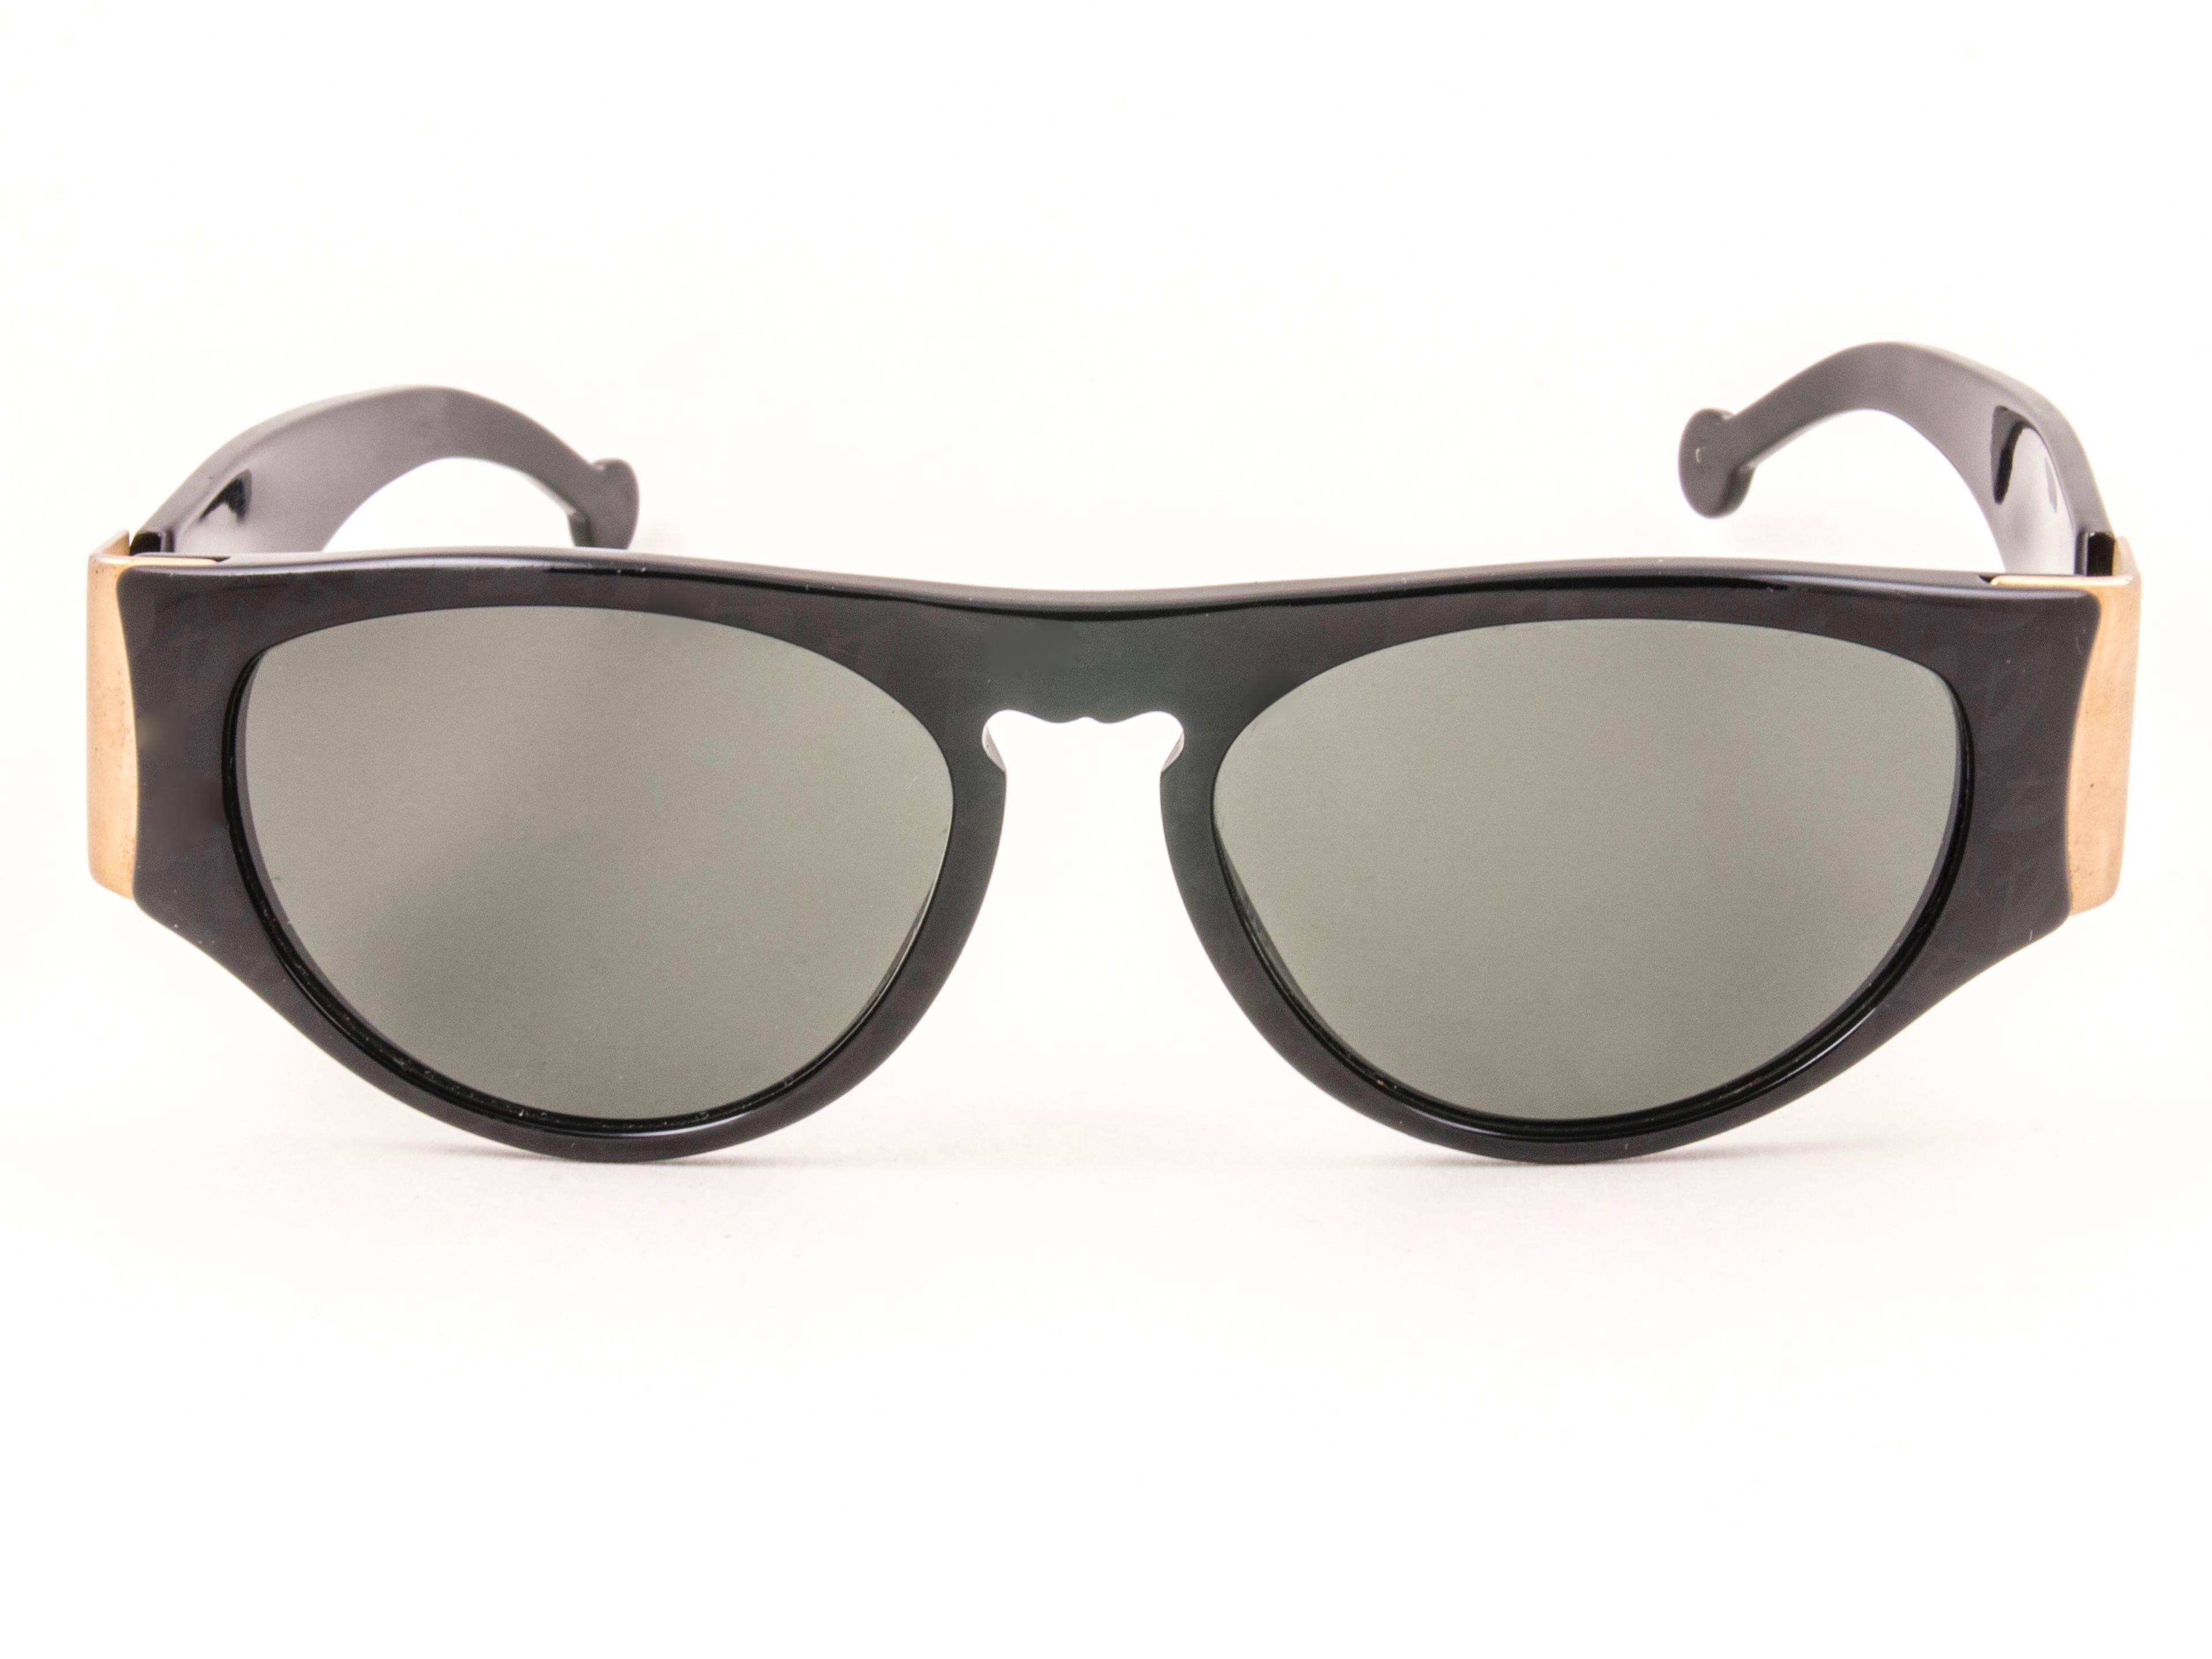 New Vintage Karl Lagerfeld L3606 Black Grey Lens 1990 Germany Sunglasses In Excellent Condition For Sale In Baleares, Baleares